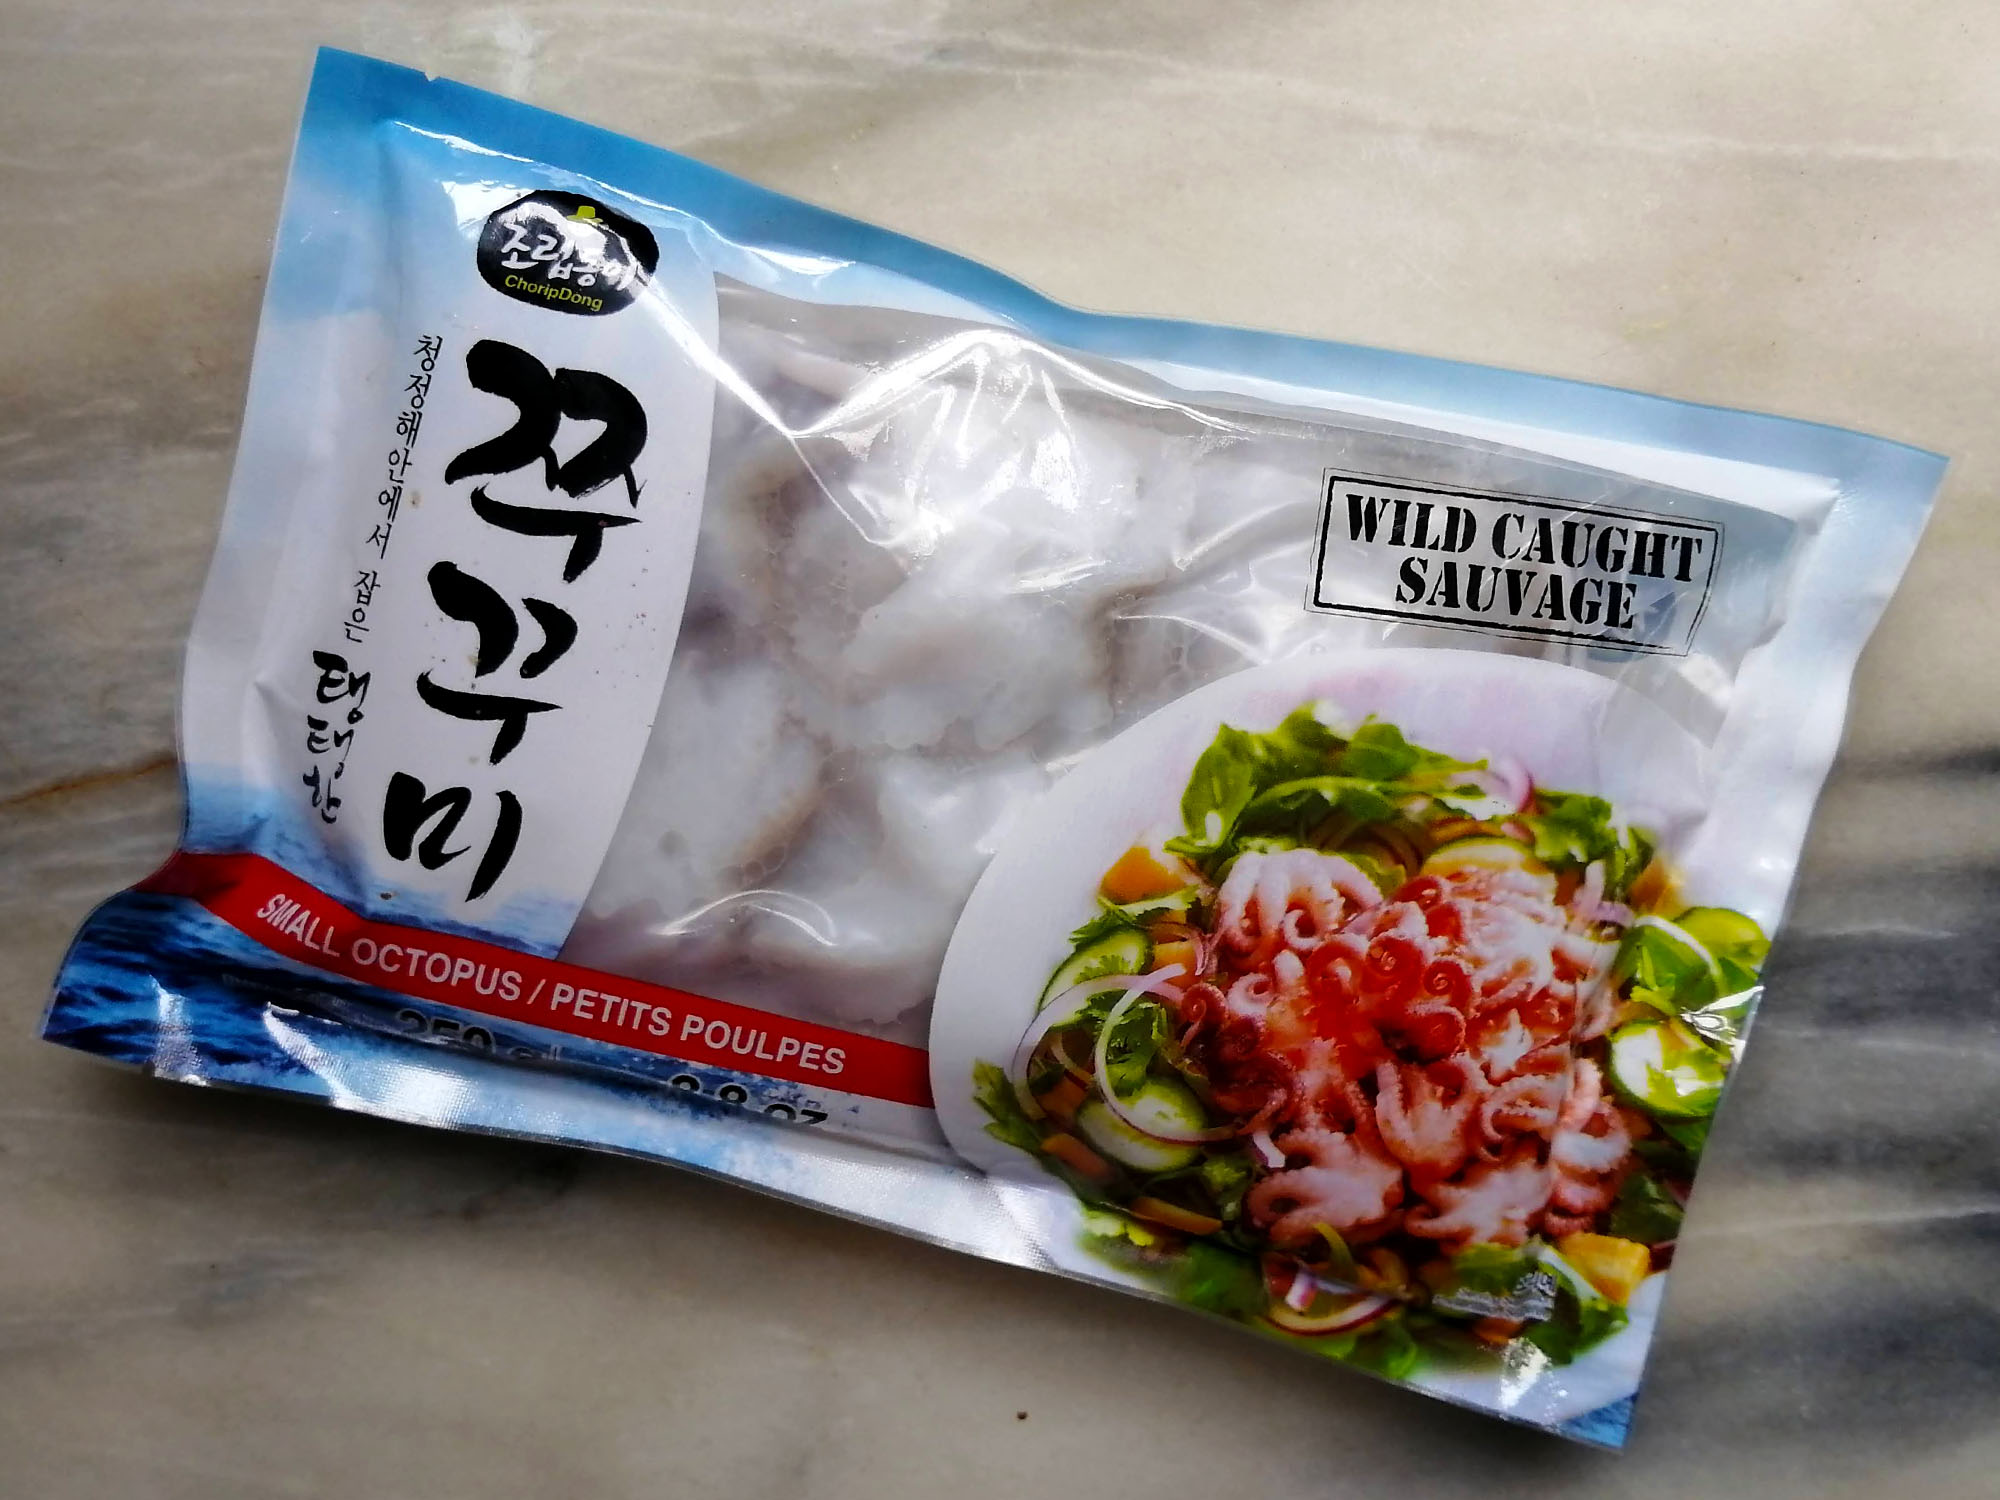 A package of imported frozen baby octopus with Asian writing; the words â€œwild caughtâ€ is prominently displayed in English and French. Photo by Paul Young.